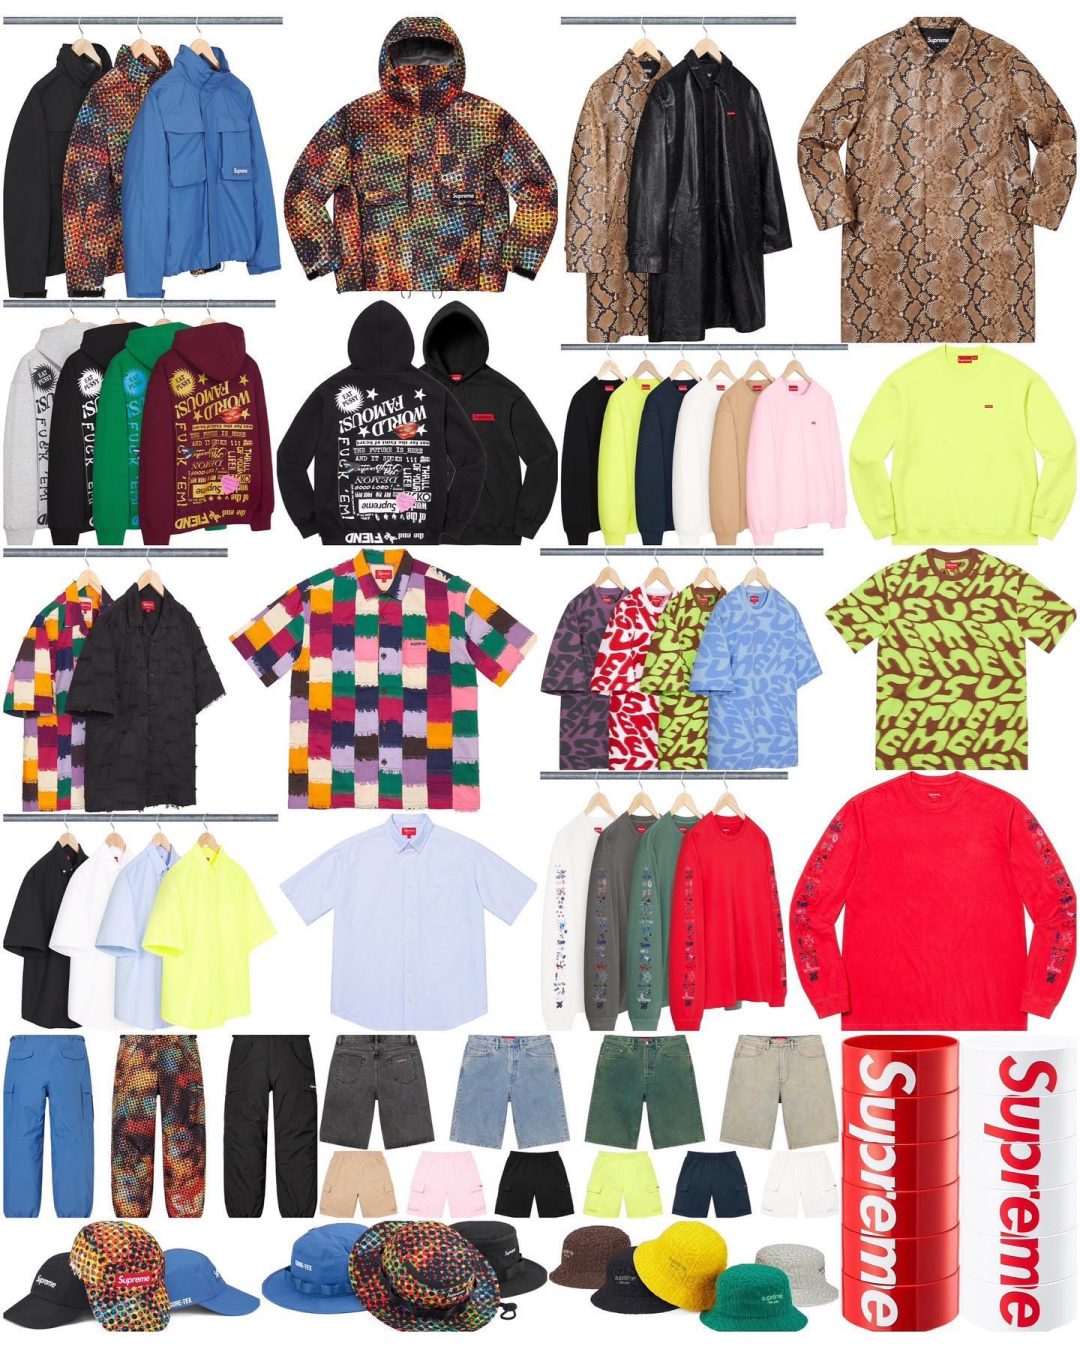 supreme-online-store-20230415-week8-23ss-release-items